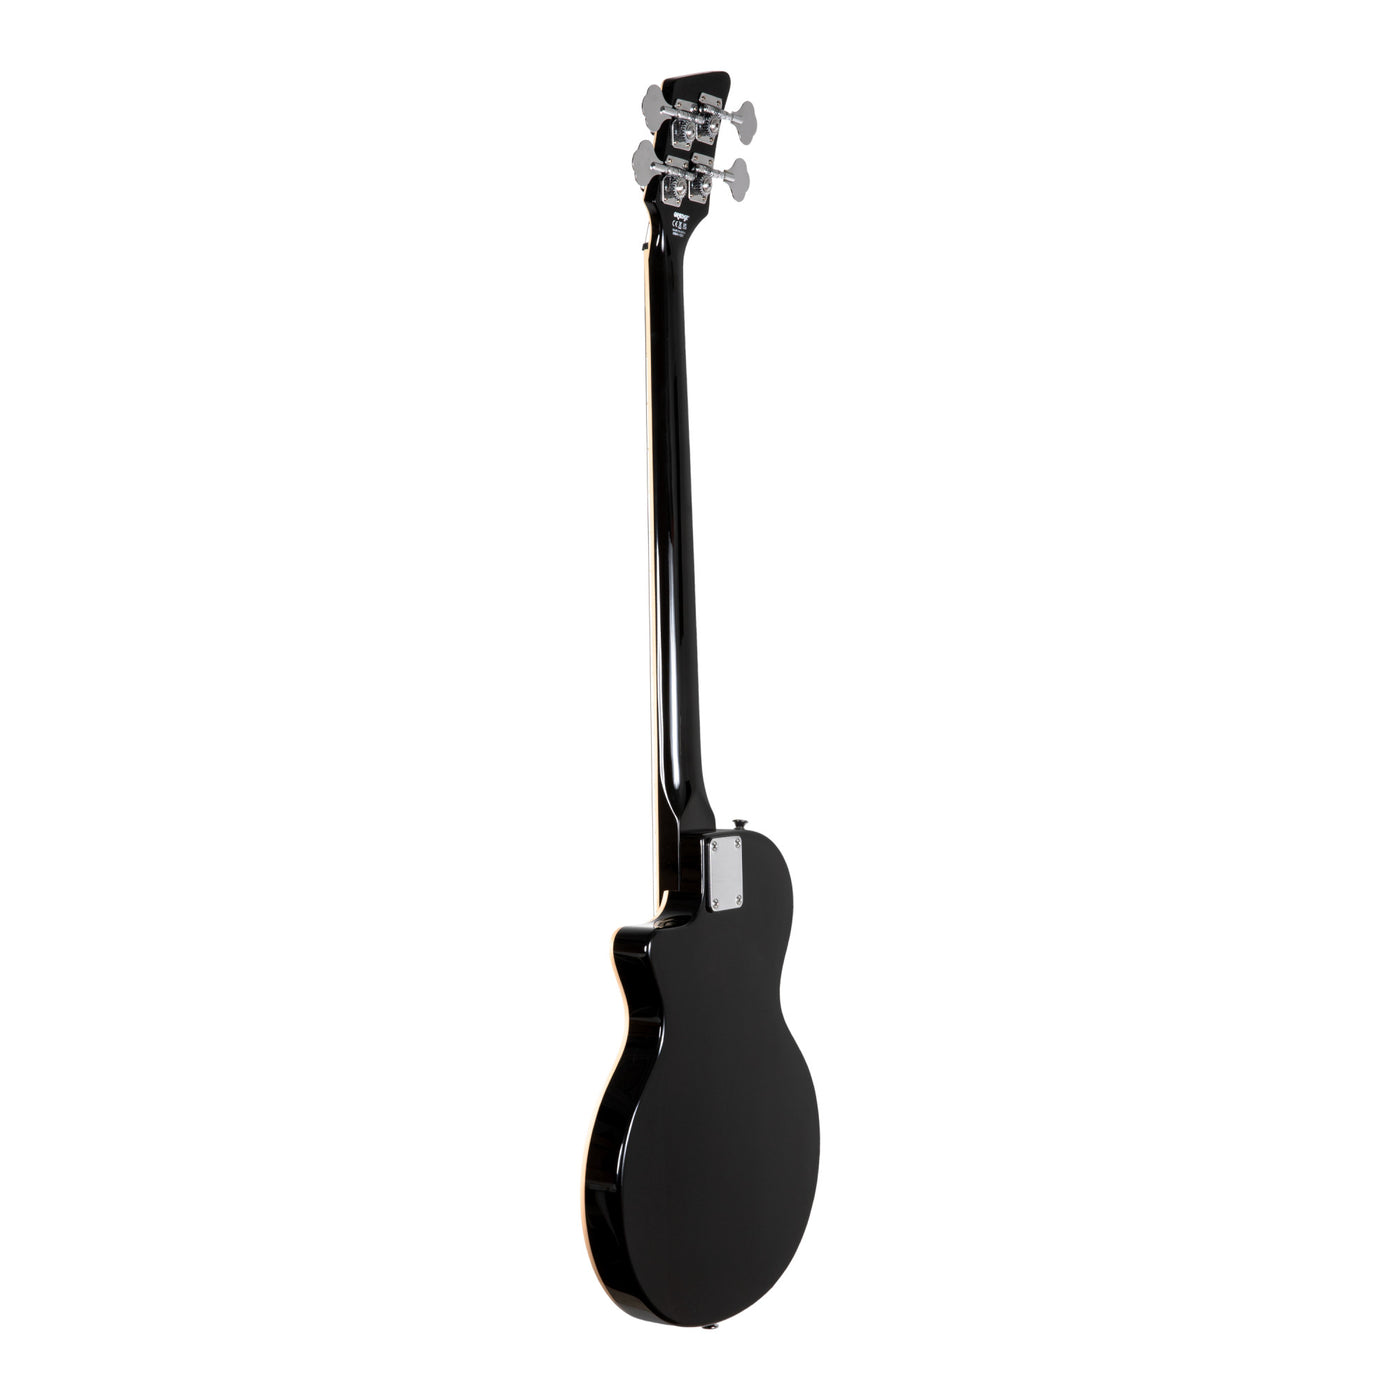 Orange O-Bass, Professional Electric Bass Guitar for Recording and Live Music Performances, Black